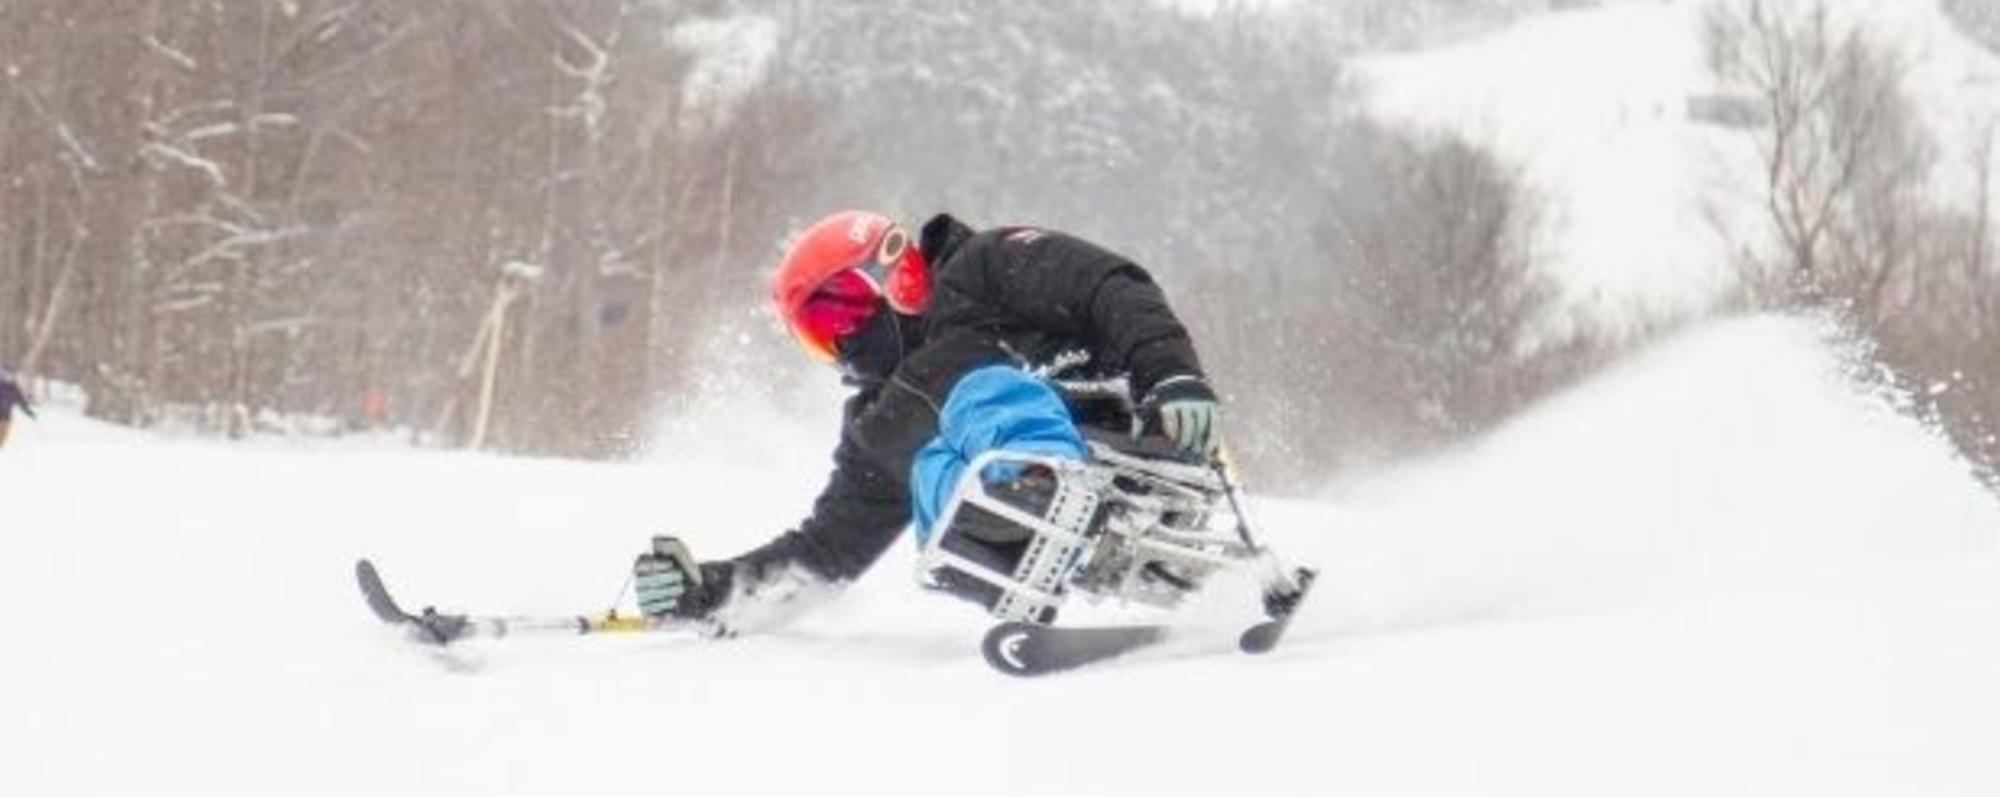 An adaptive skier in action on a snow-covered slope on Whiteface Mountain